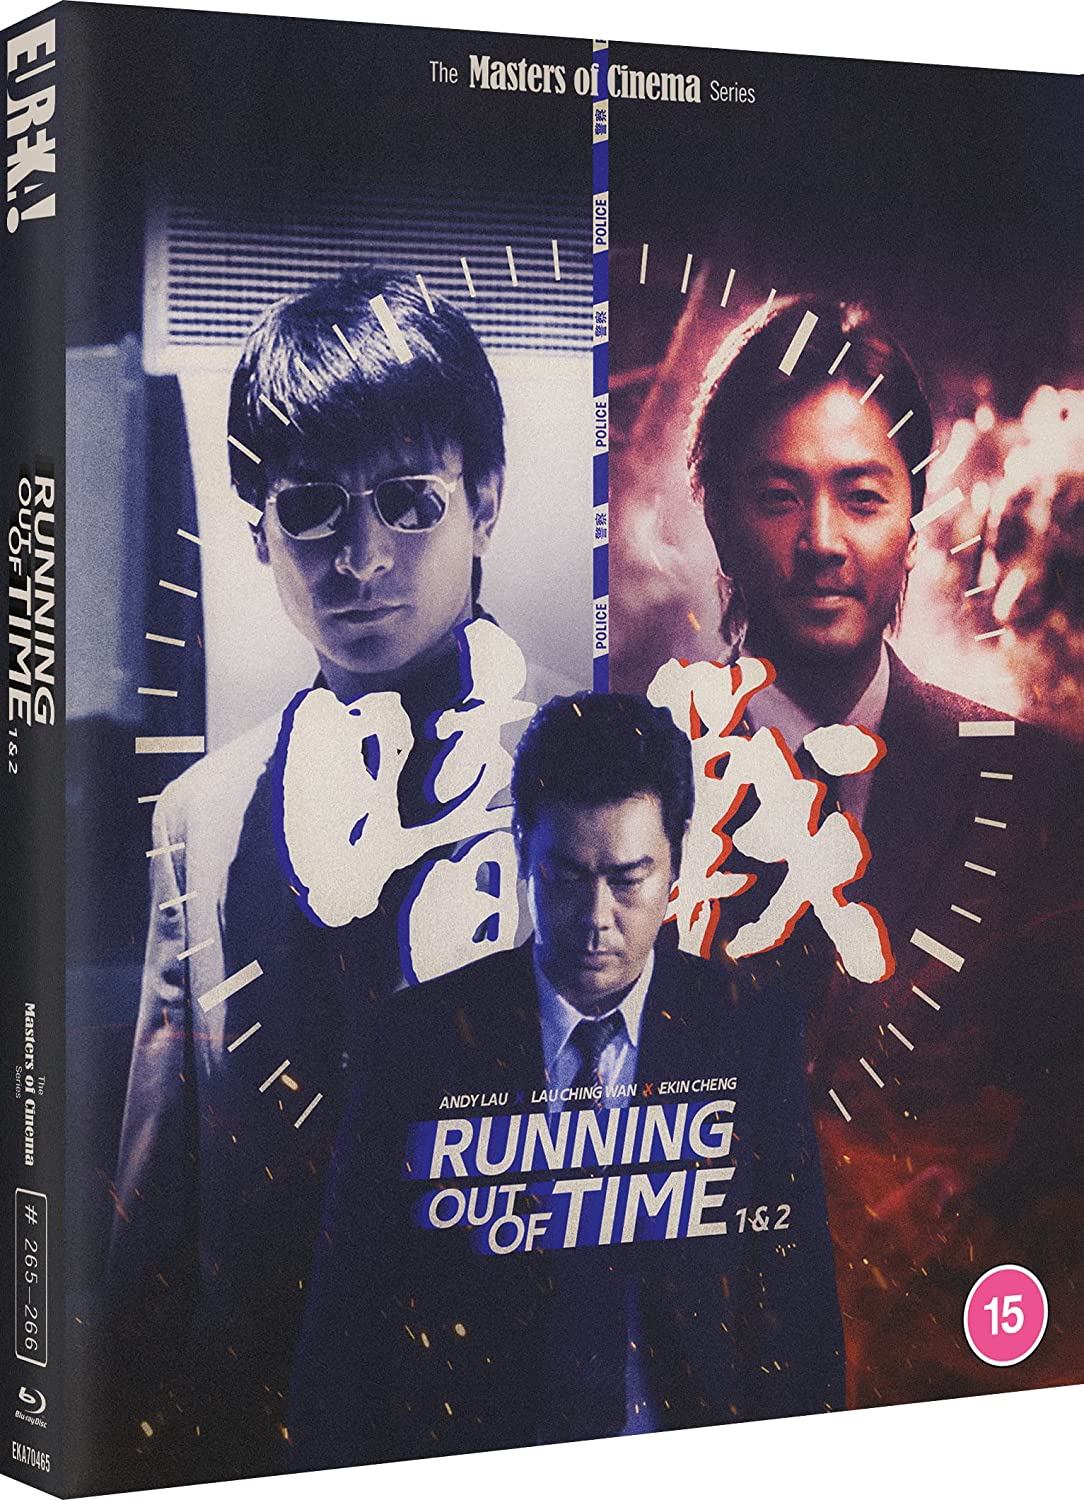 RUNNING OUT OF TIME / RUNNING OUT OF TIME 2 (REGION B IMPORT - LIMITED EDITION) BLU-RAY